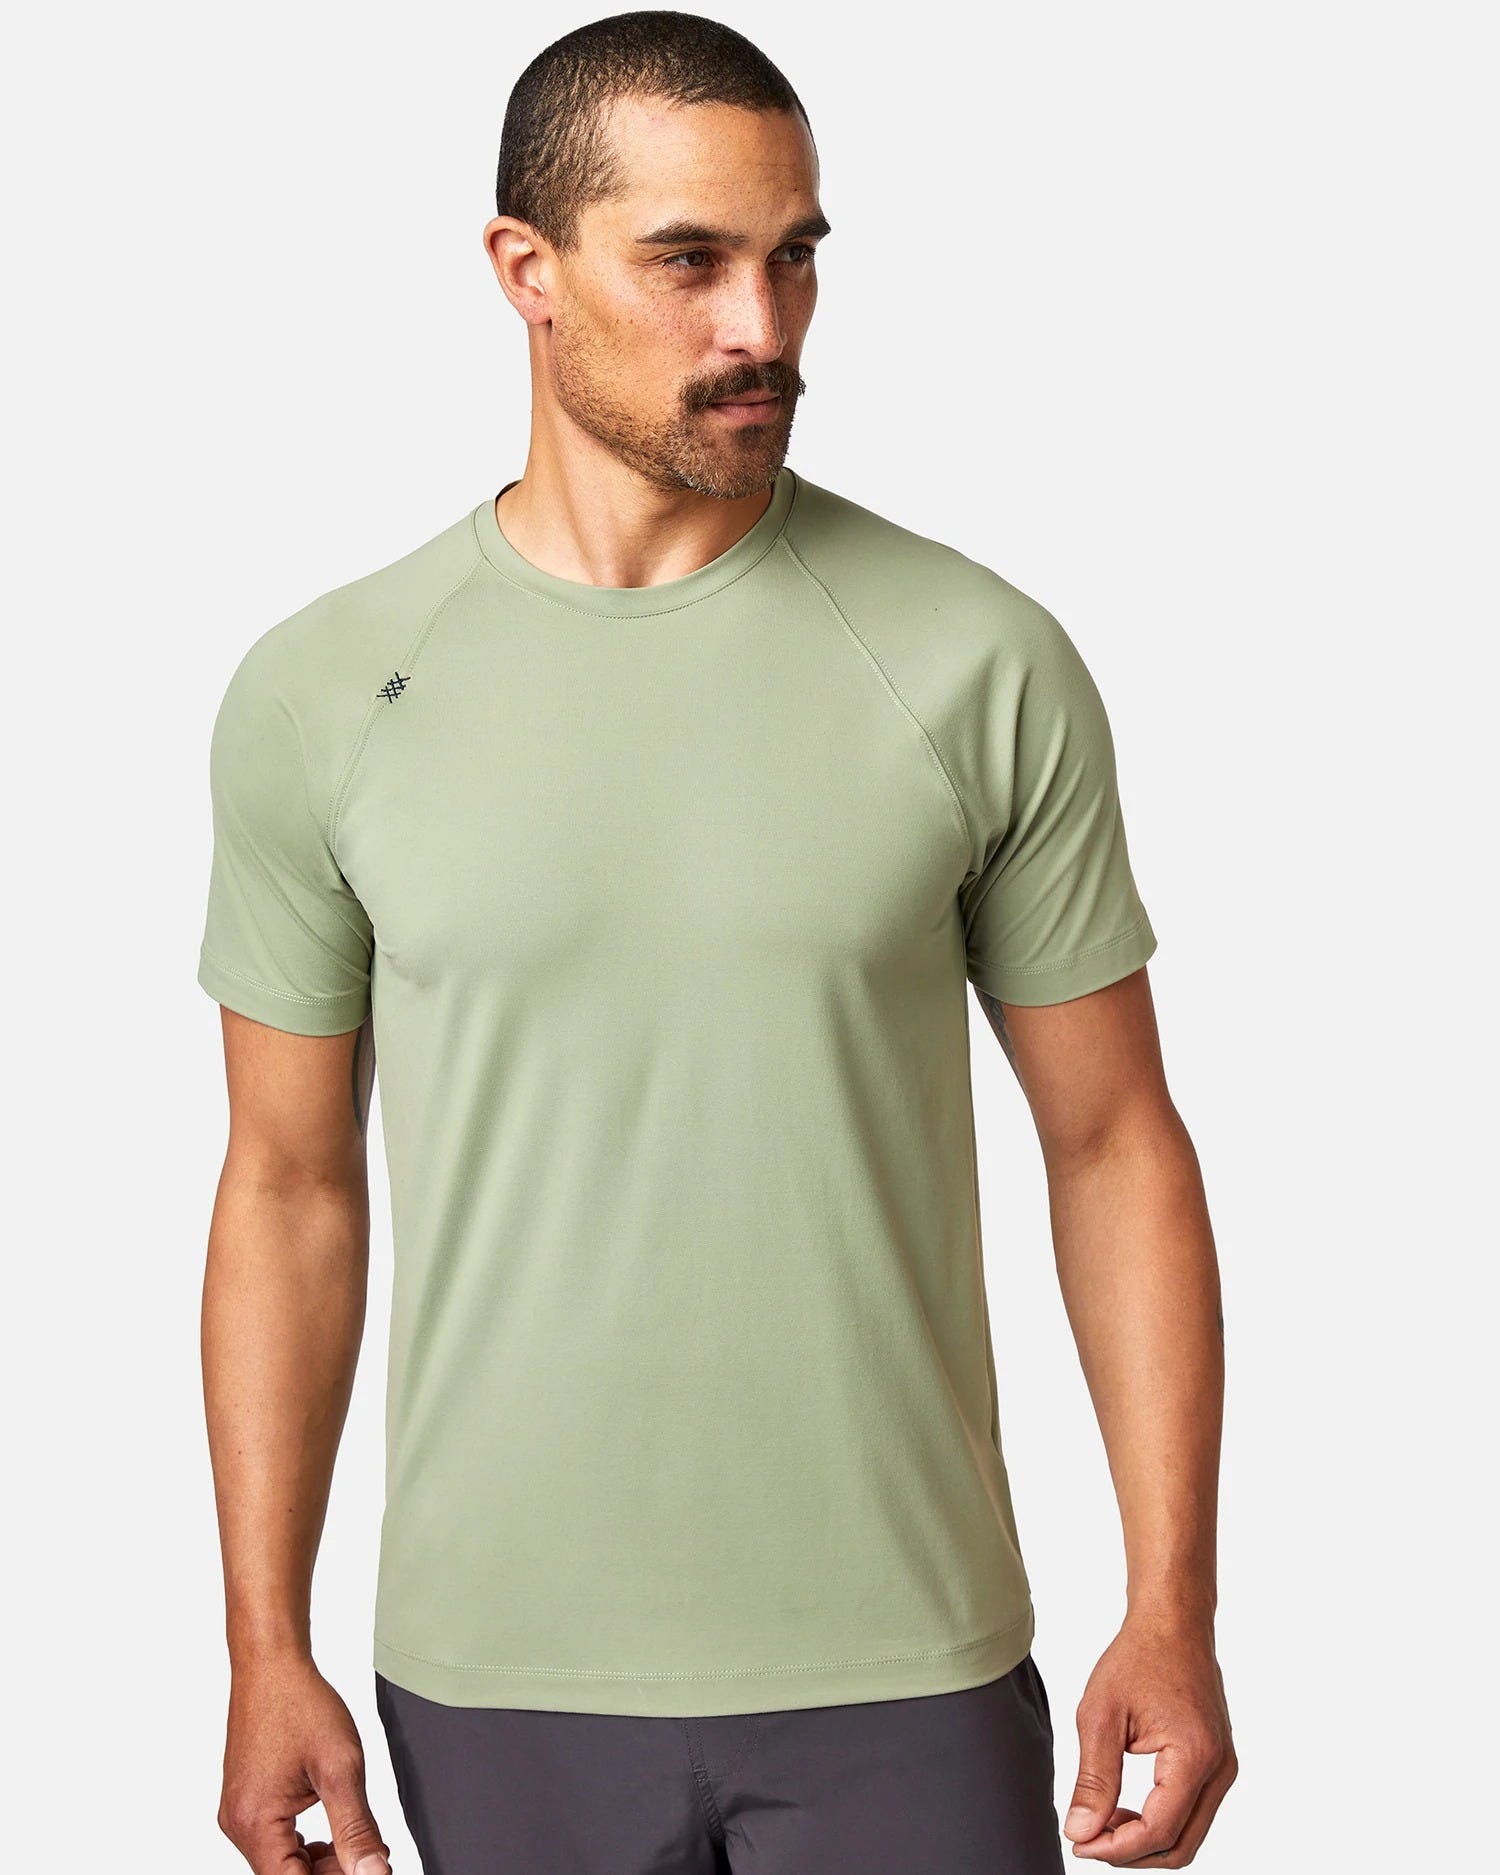 17 Moisture Wicking Shirts to Keep You Dry and Fresh